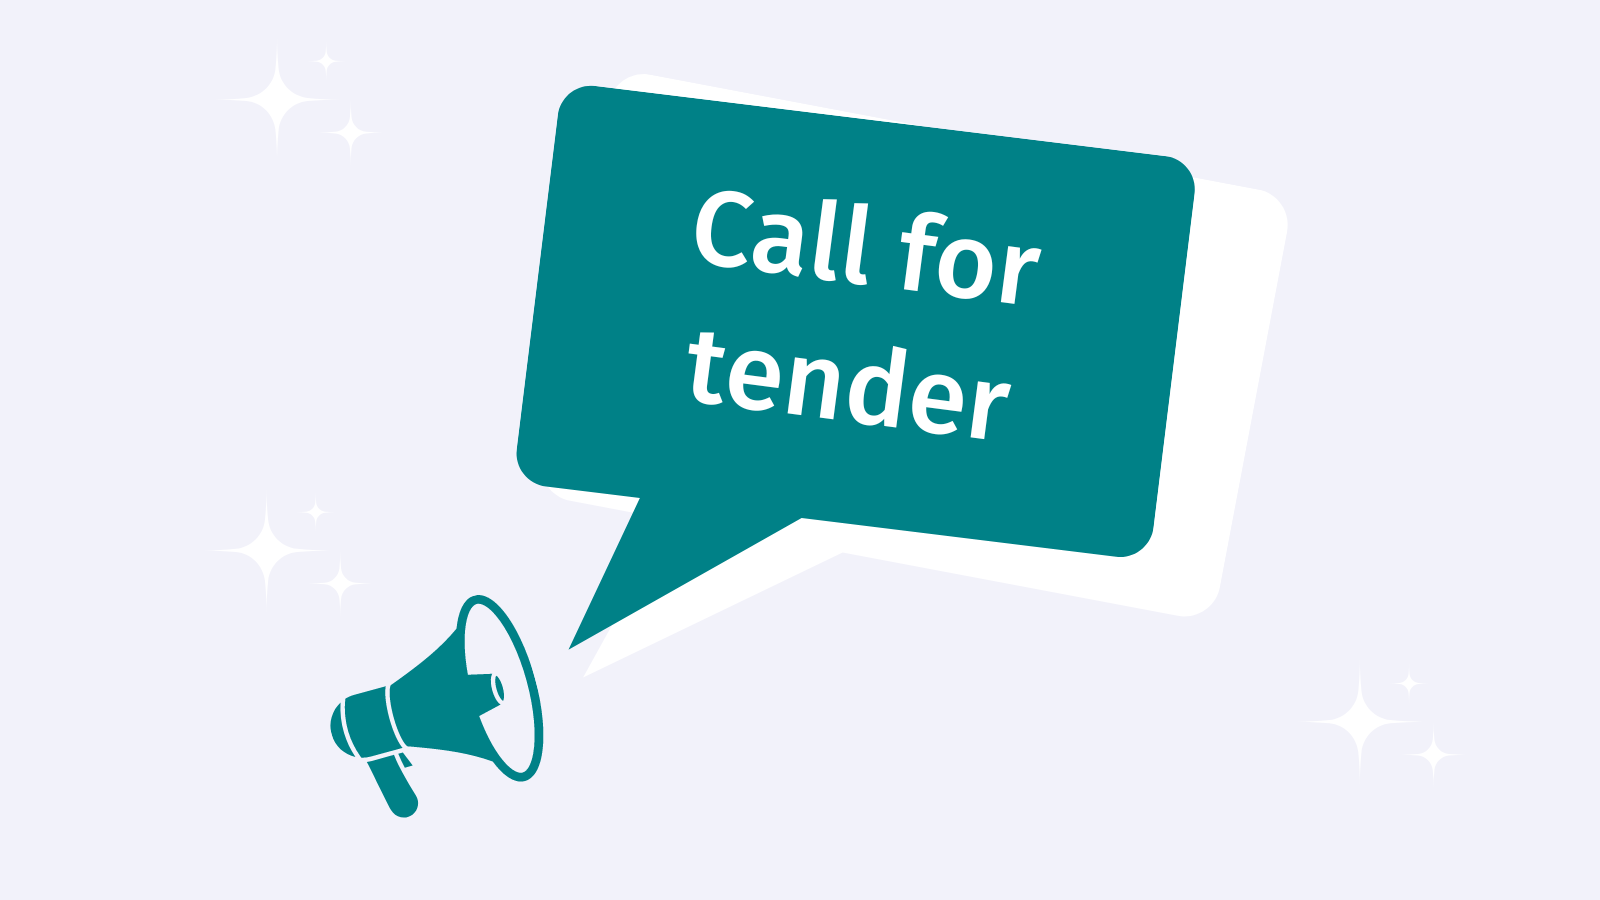 Megaphone and speech bubble with text "Call for tender"